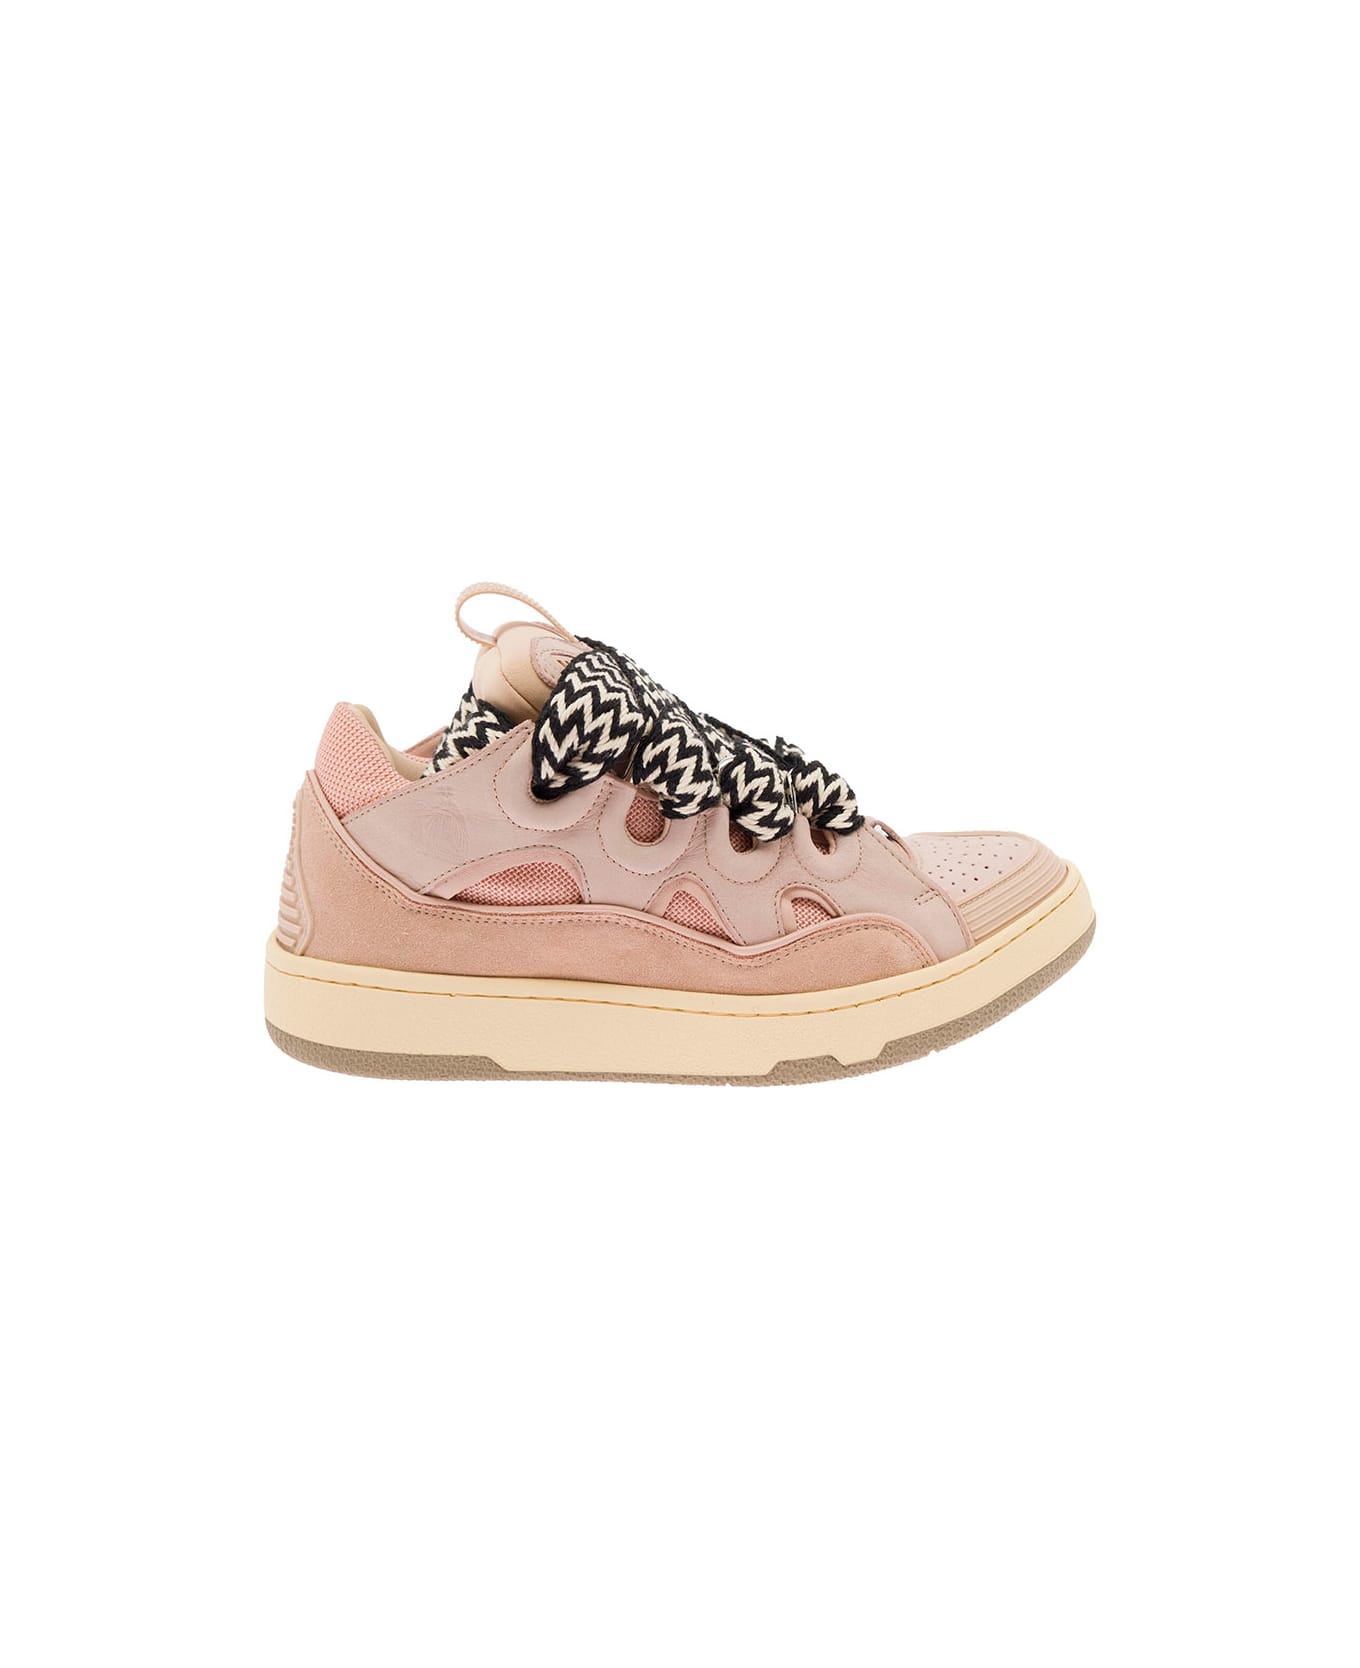 Lanvin 'curb' Multicolor Low-top Sneaker With Oversized Laces In Leather Woman - Pink